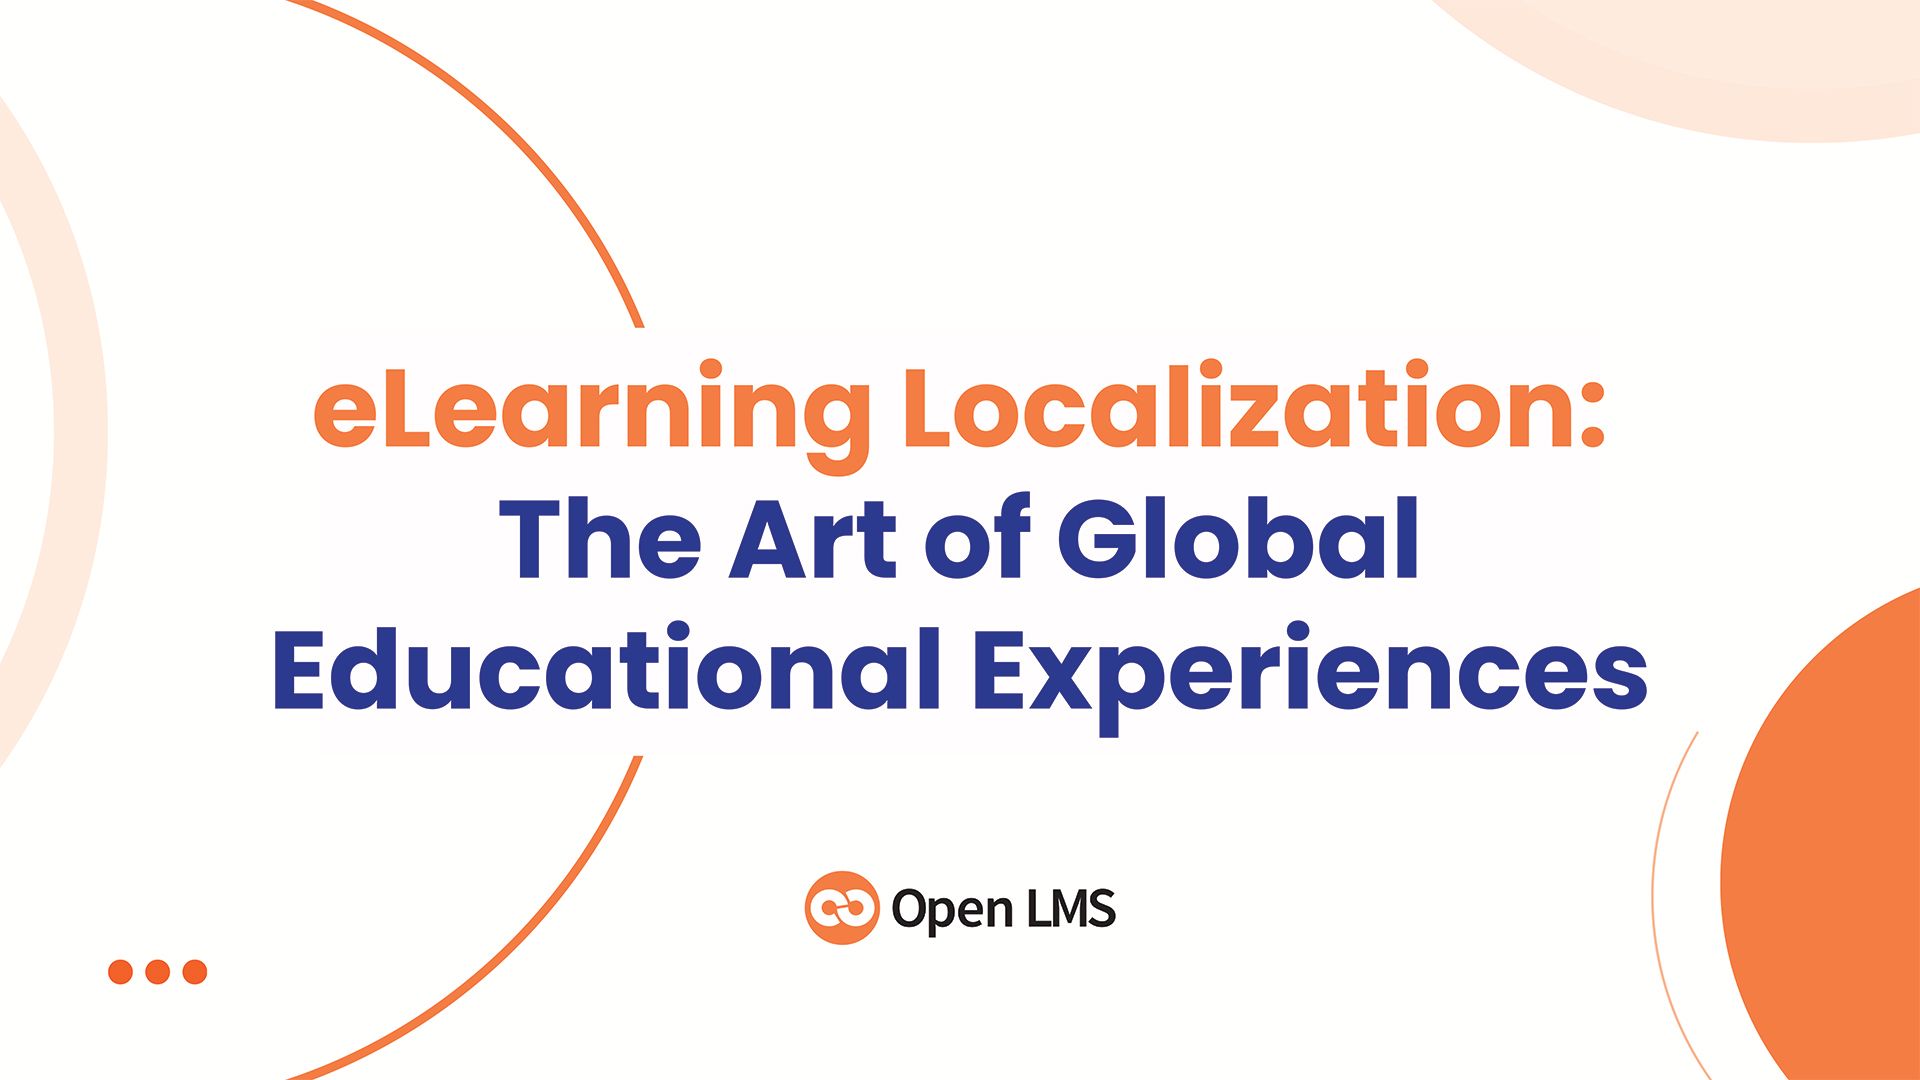 eLearning Localization: The Art of Global Educational Experiences